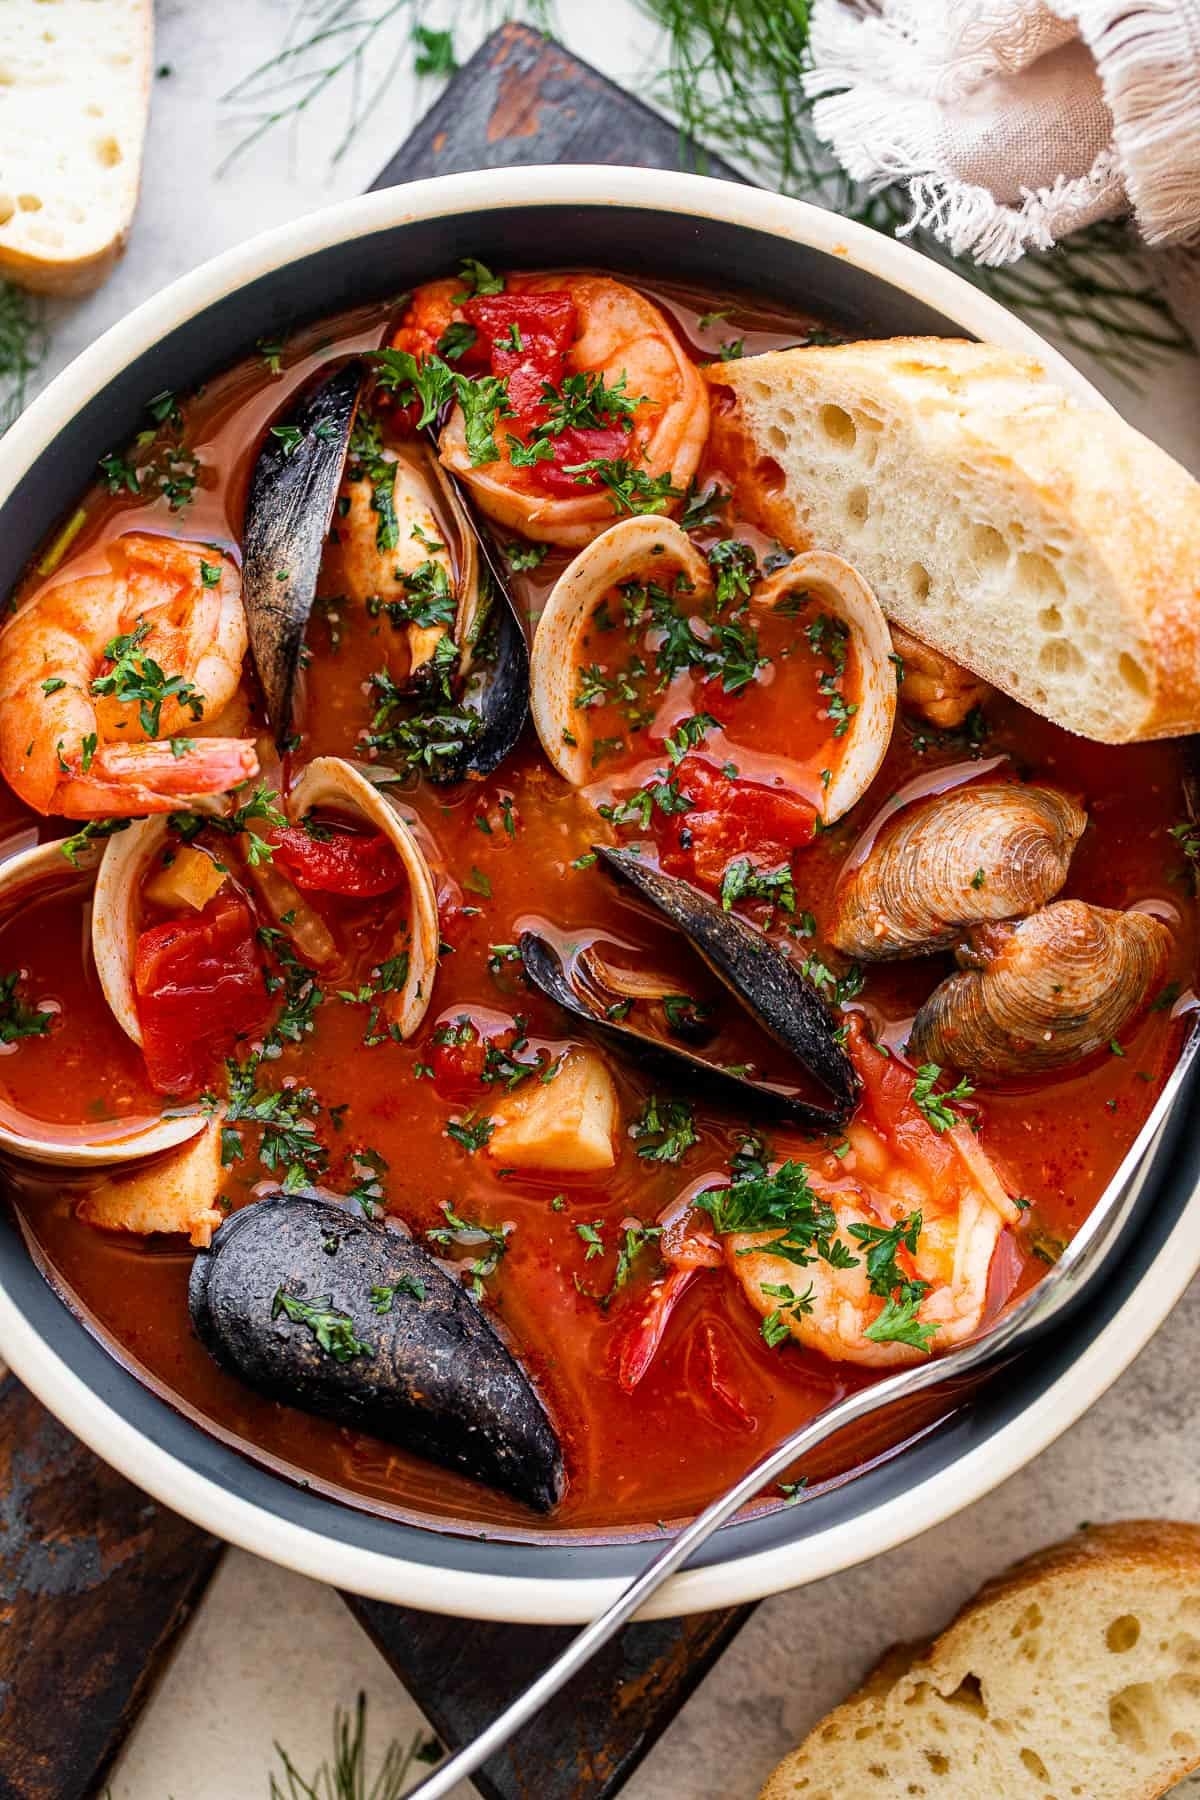 Seafood stew with bread on the side